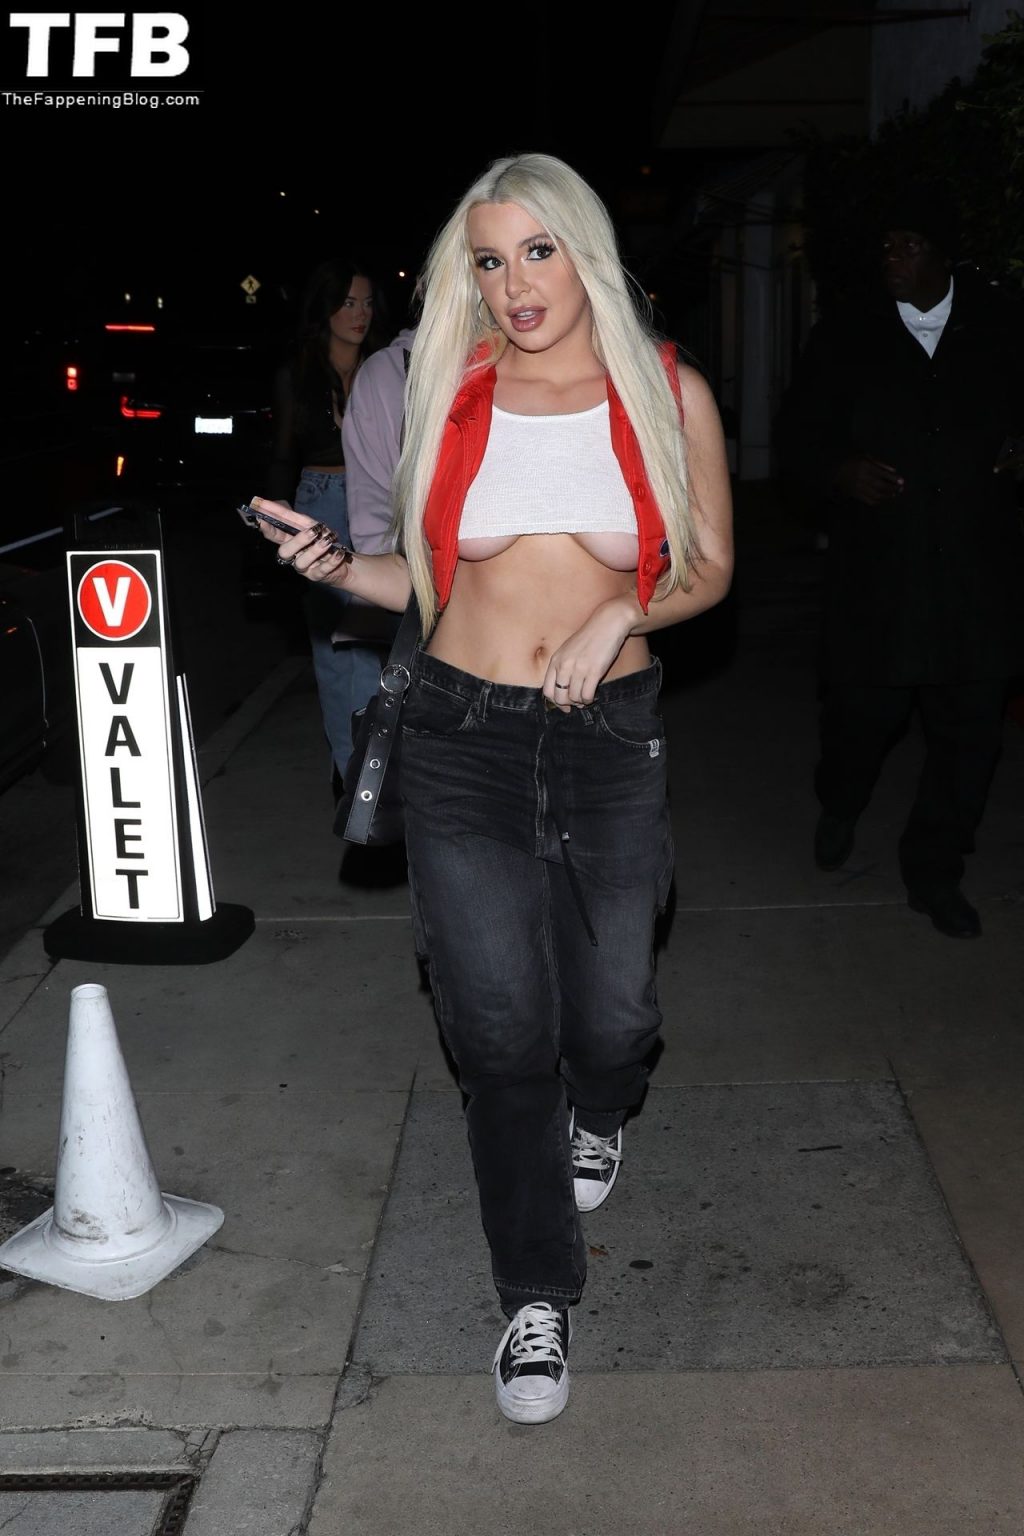 Tana Mongeau Shows Off Her Underboob as She Enjoys a Night Out in Santa Monica (18 Photos + Video)